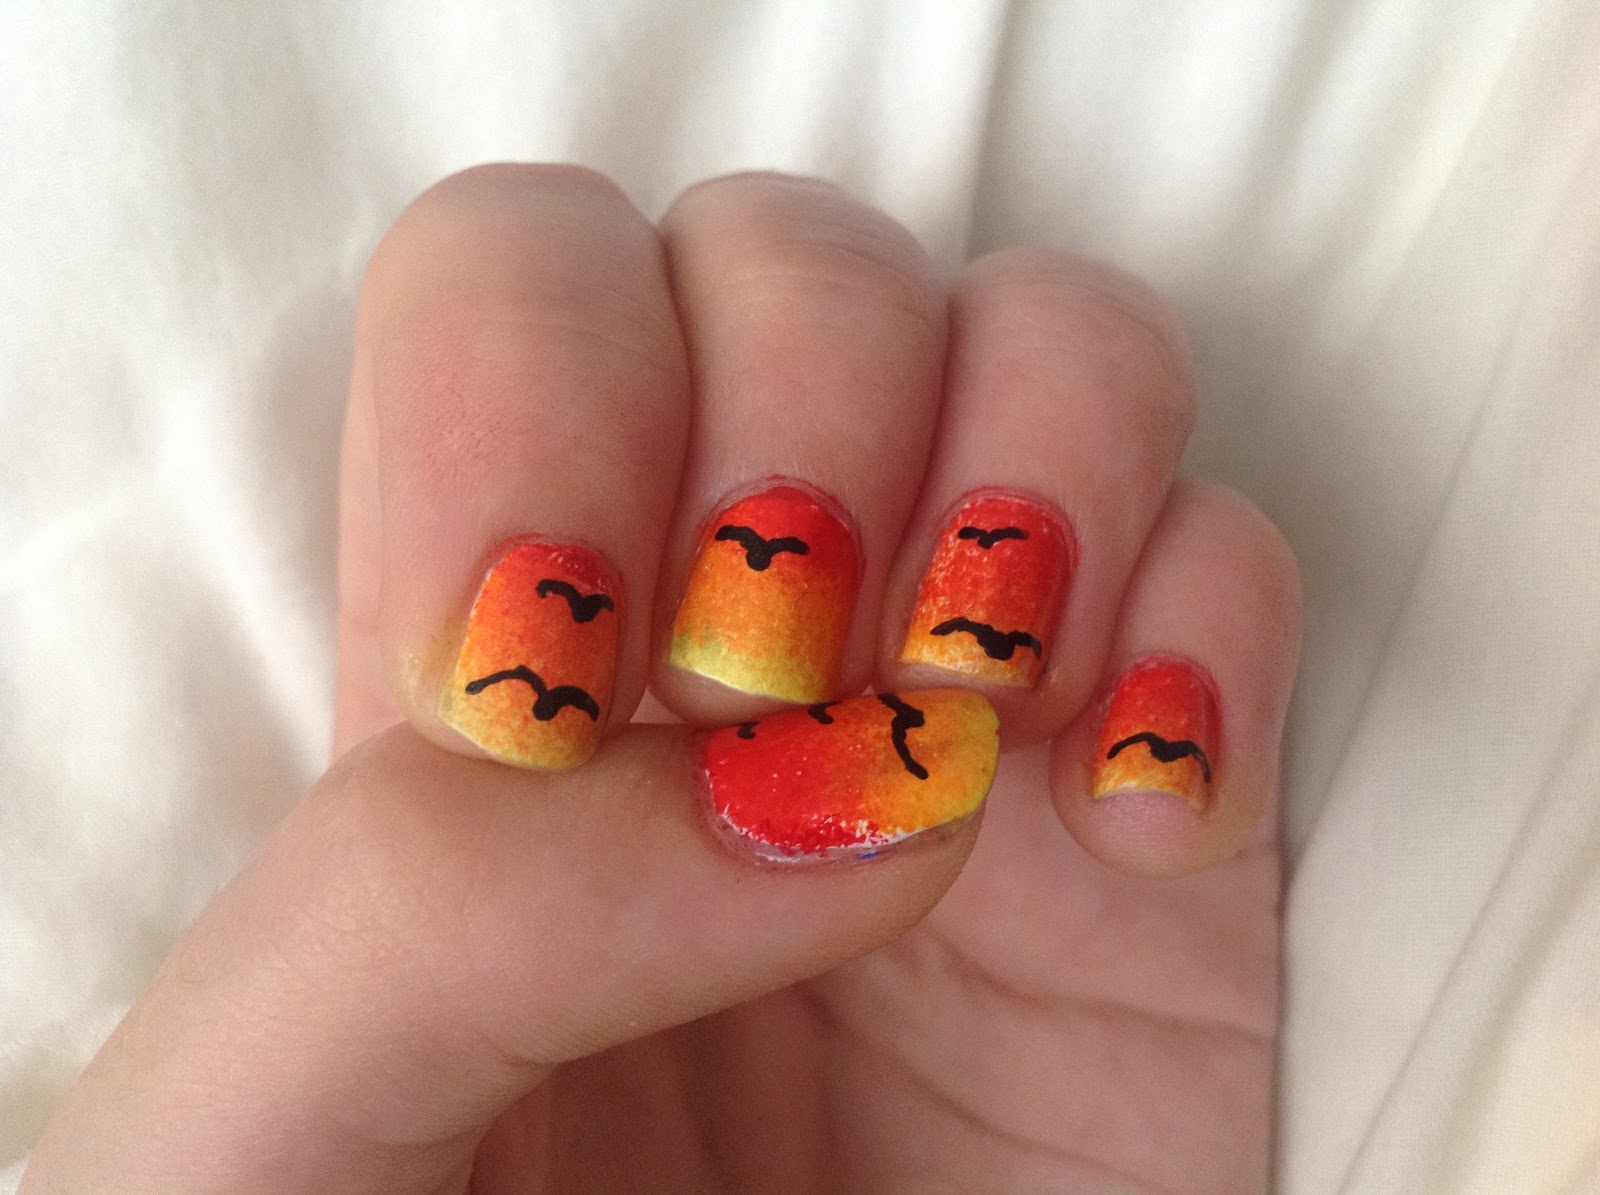 9. Sunset silhouette nail art - wide 8